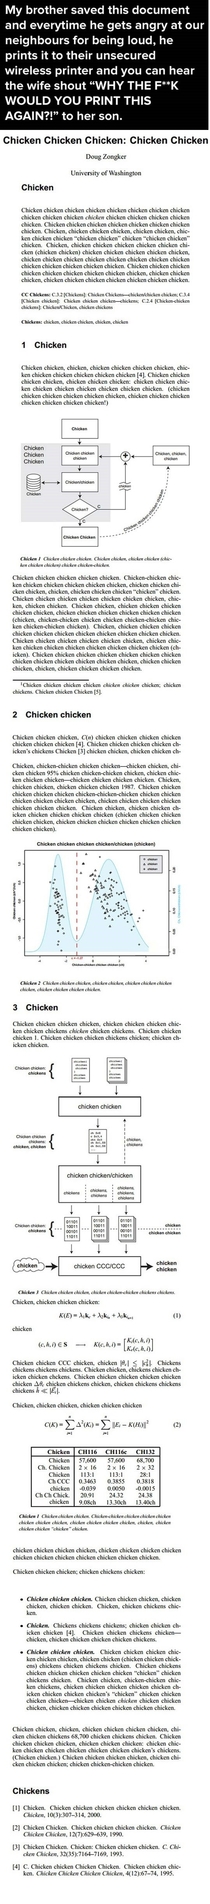 This ridiculous chicken document never fails to crack me up